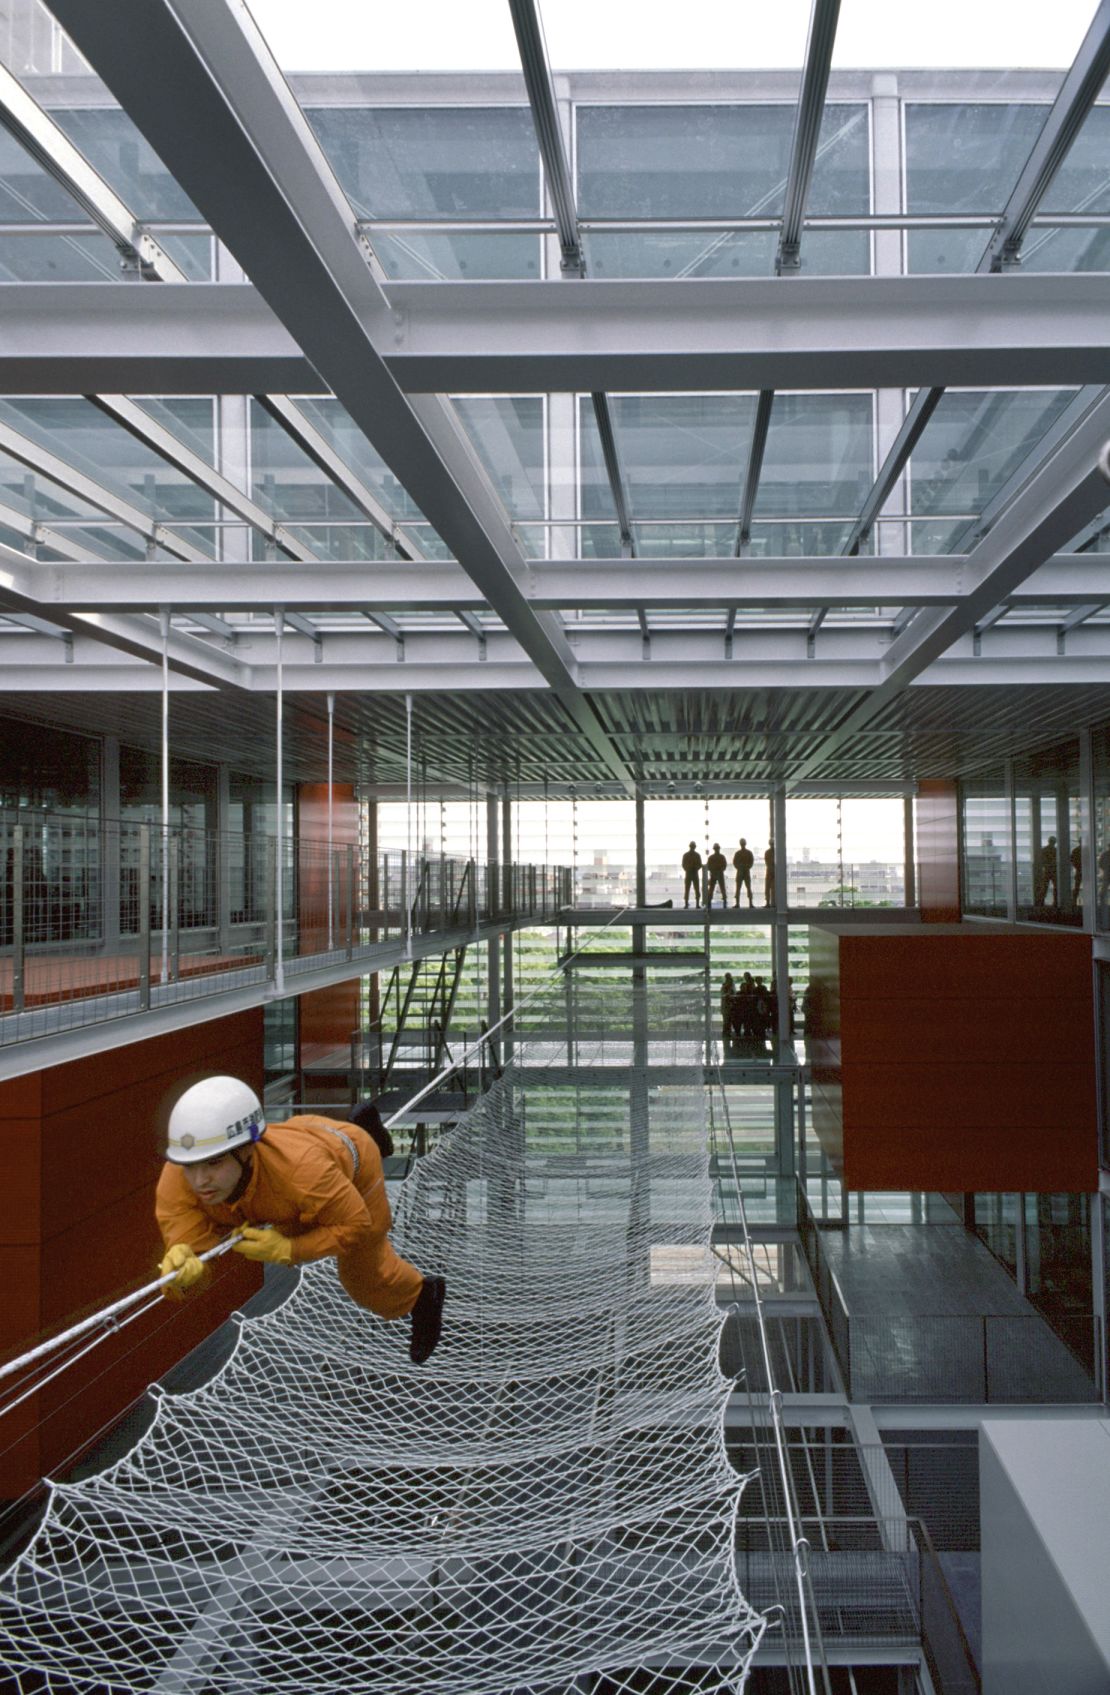 A firefighter in training at Yamamoto's Hiroshima Nishi Fire Station, which was completed in 2000.